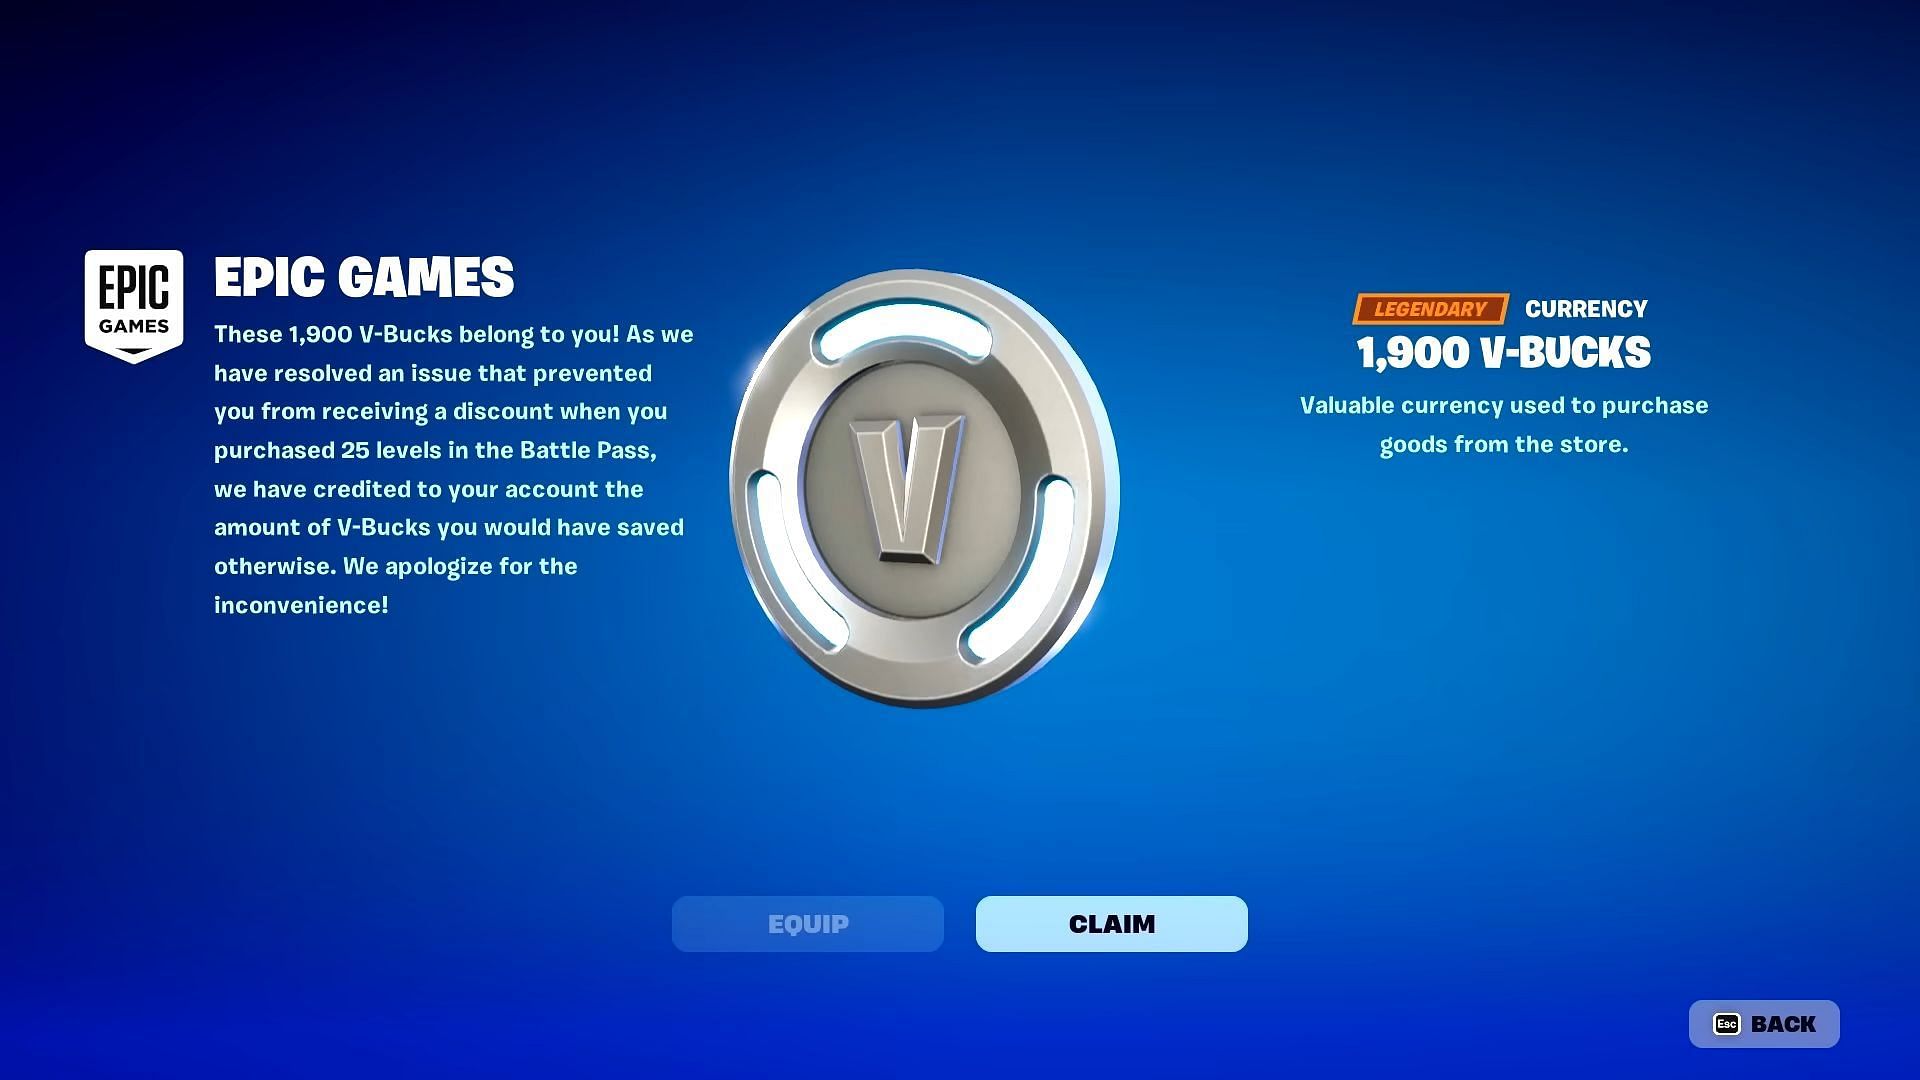 If you are eligible, you will receive 1,900 V-Bucks for free (Image via Epic Games/Fortnite)